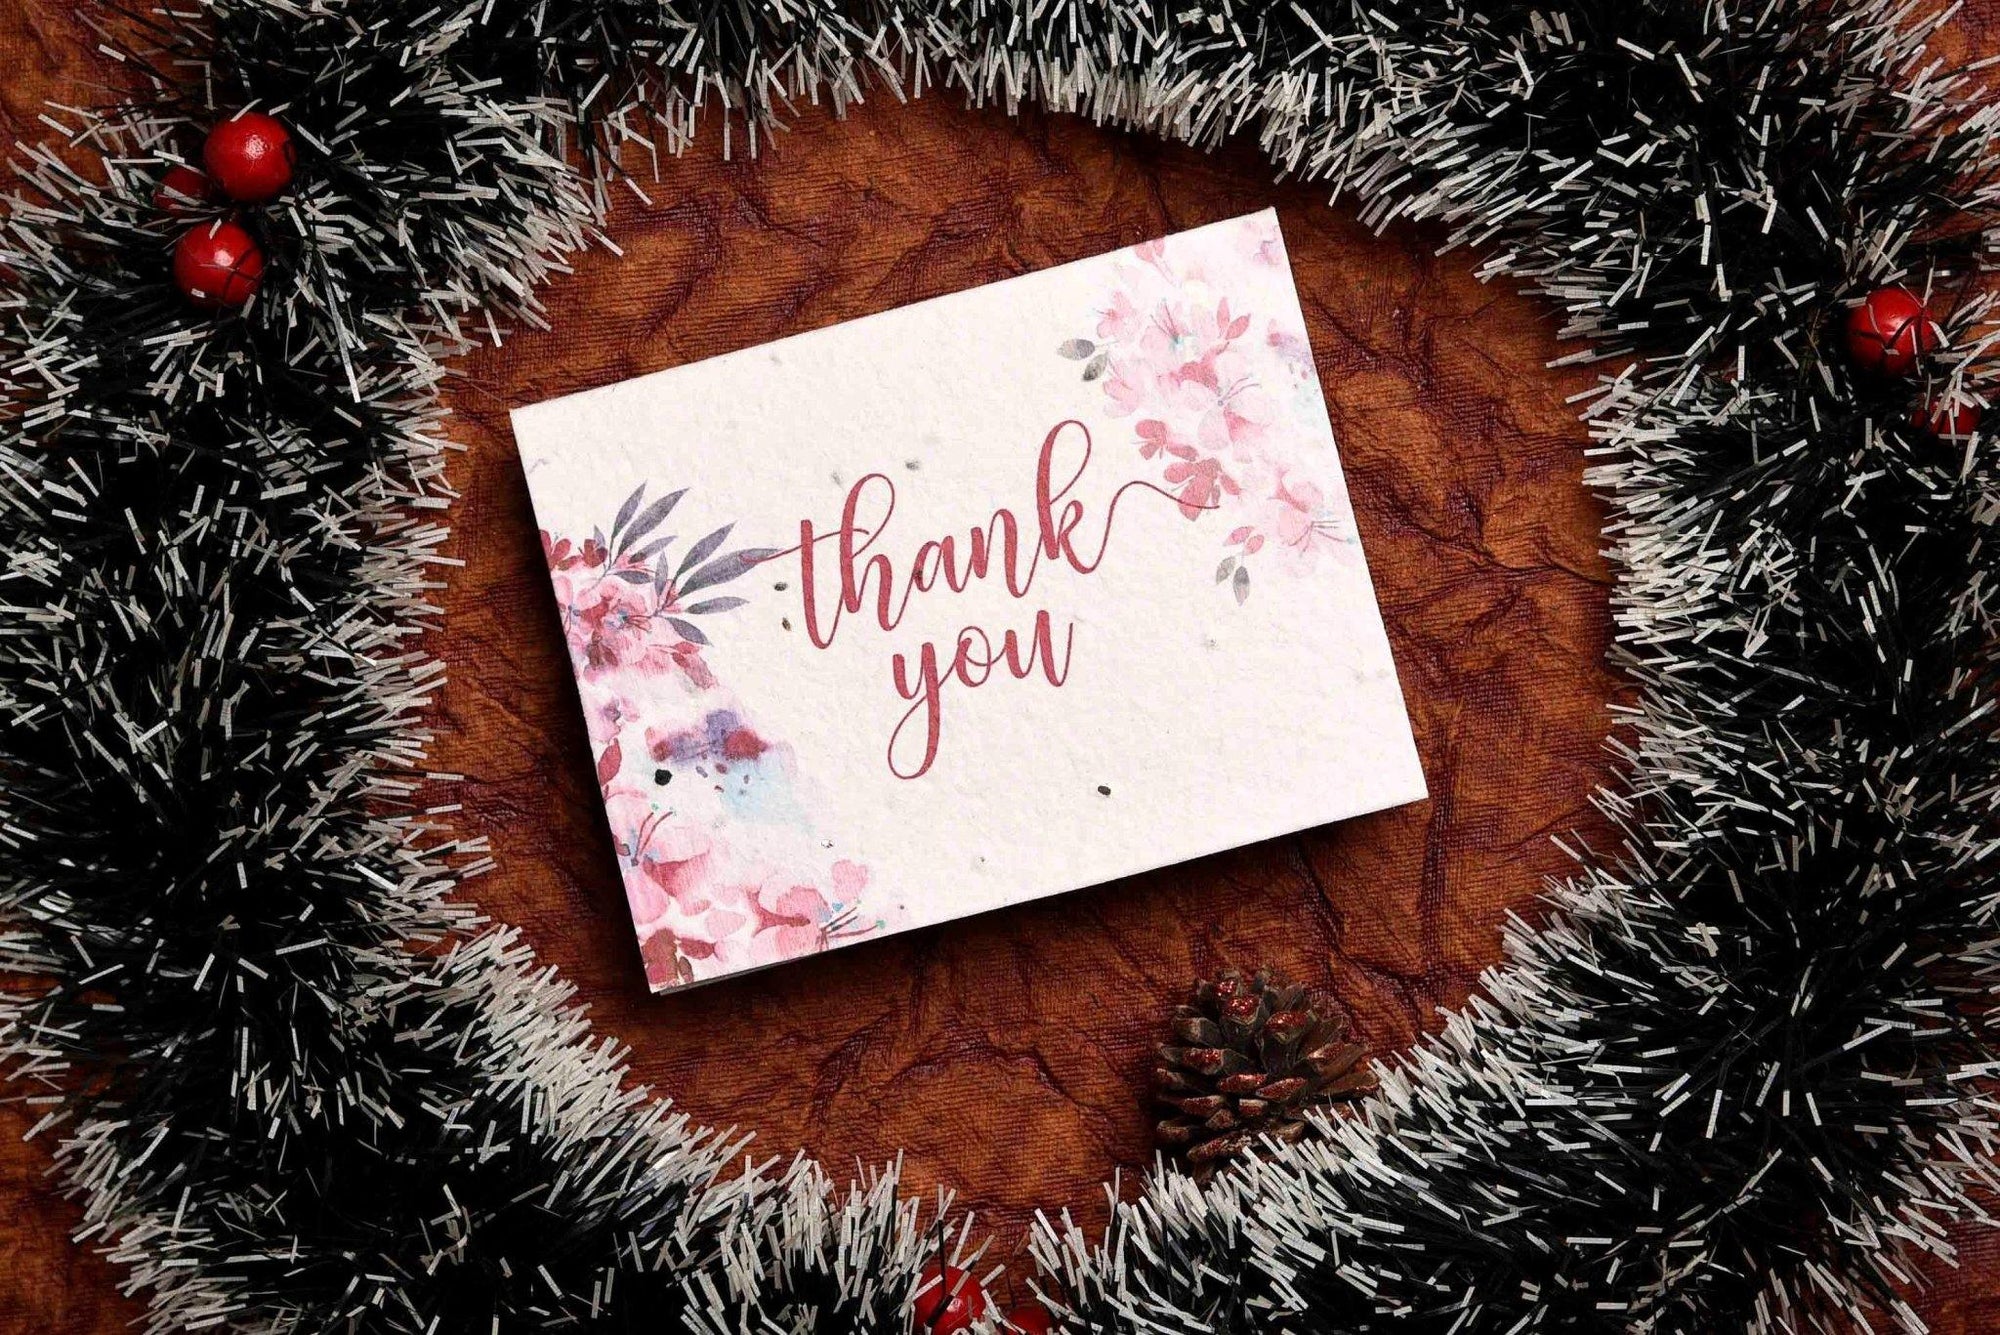  Plantable seed paper card with a Thank You greeting